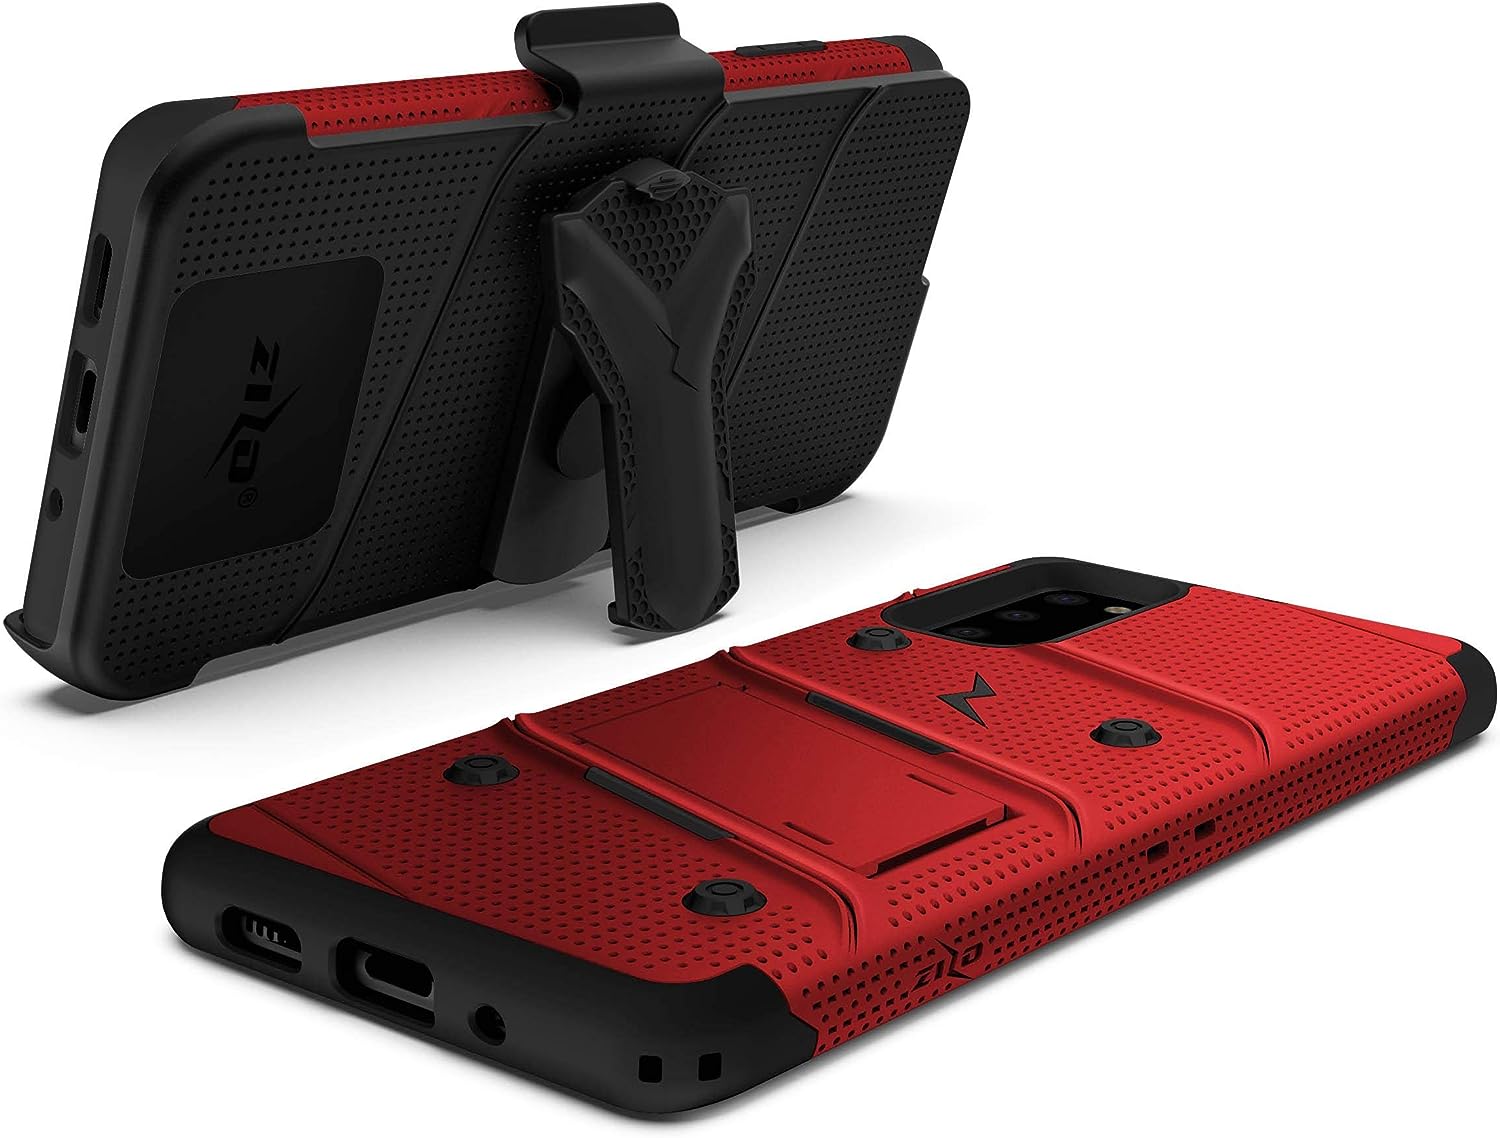 ZIZO Bolt Samsung Galaxy S20 Holster Case, Built-in Kickstand, Tempered Glass & Lanyard (4 Colors)